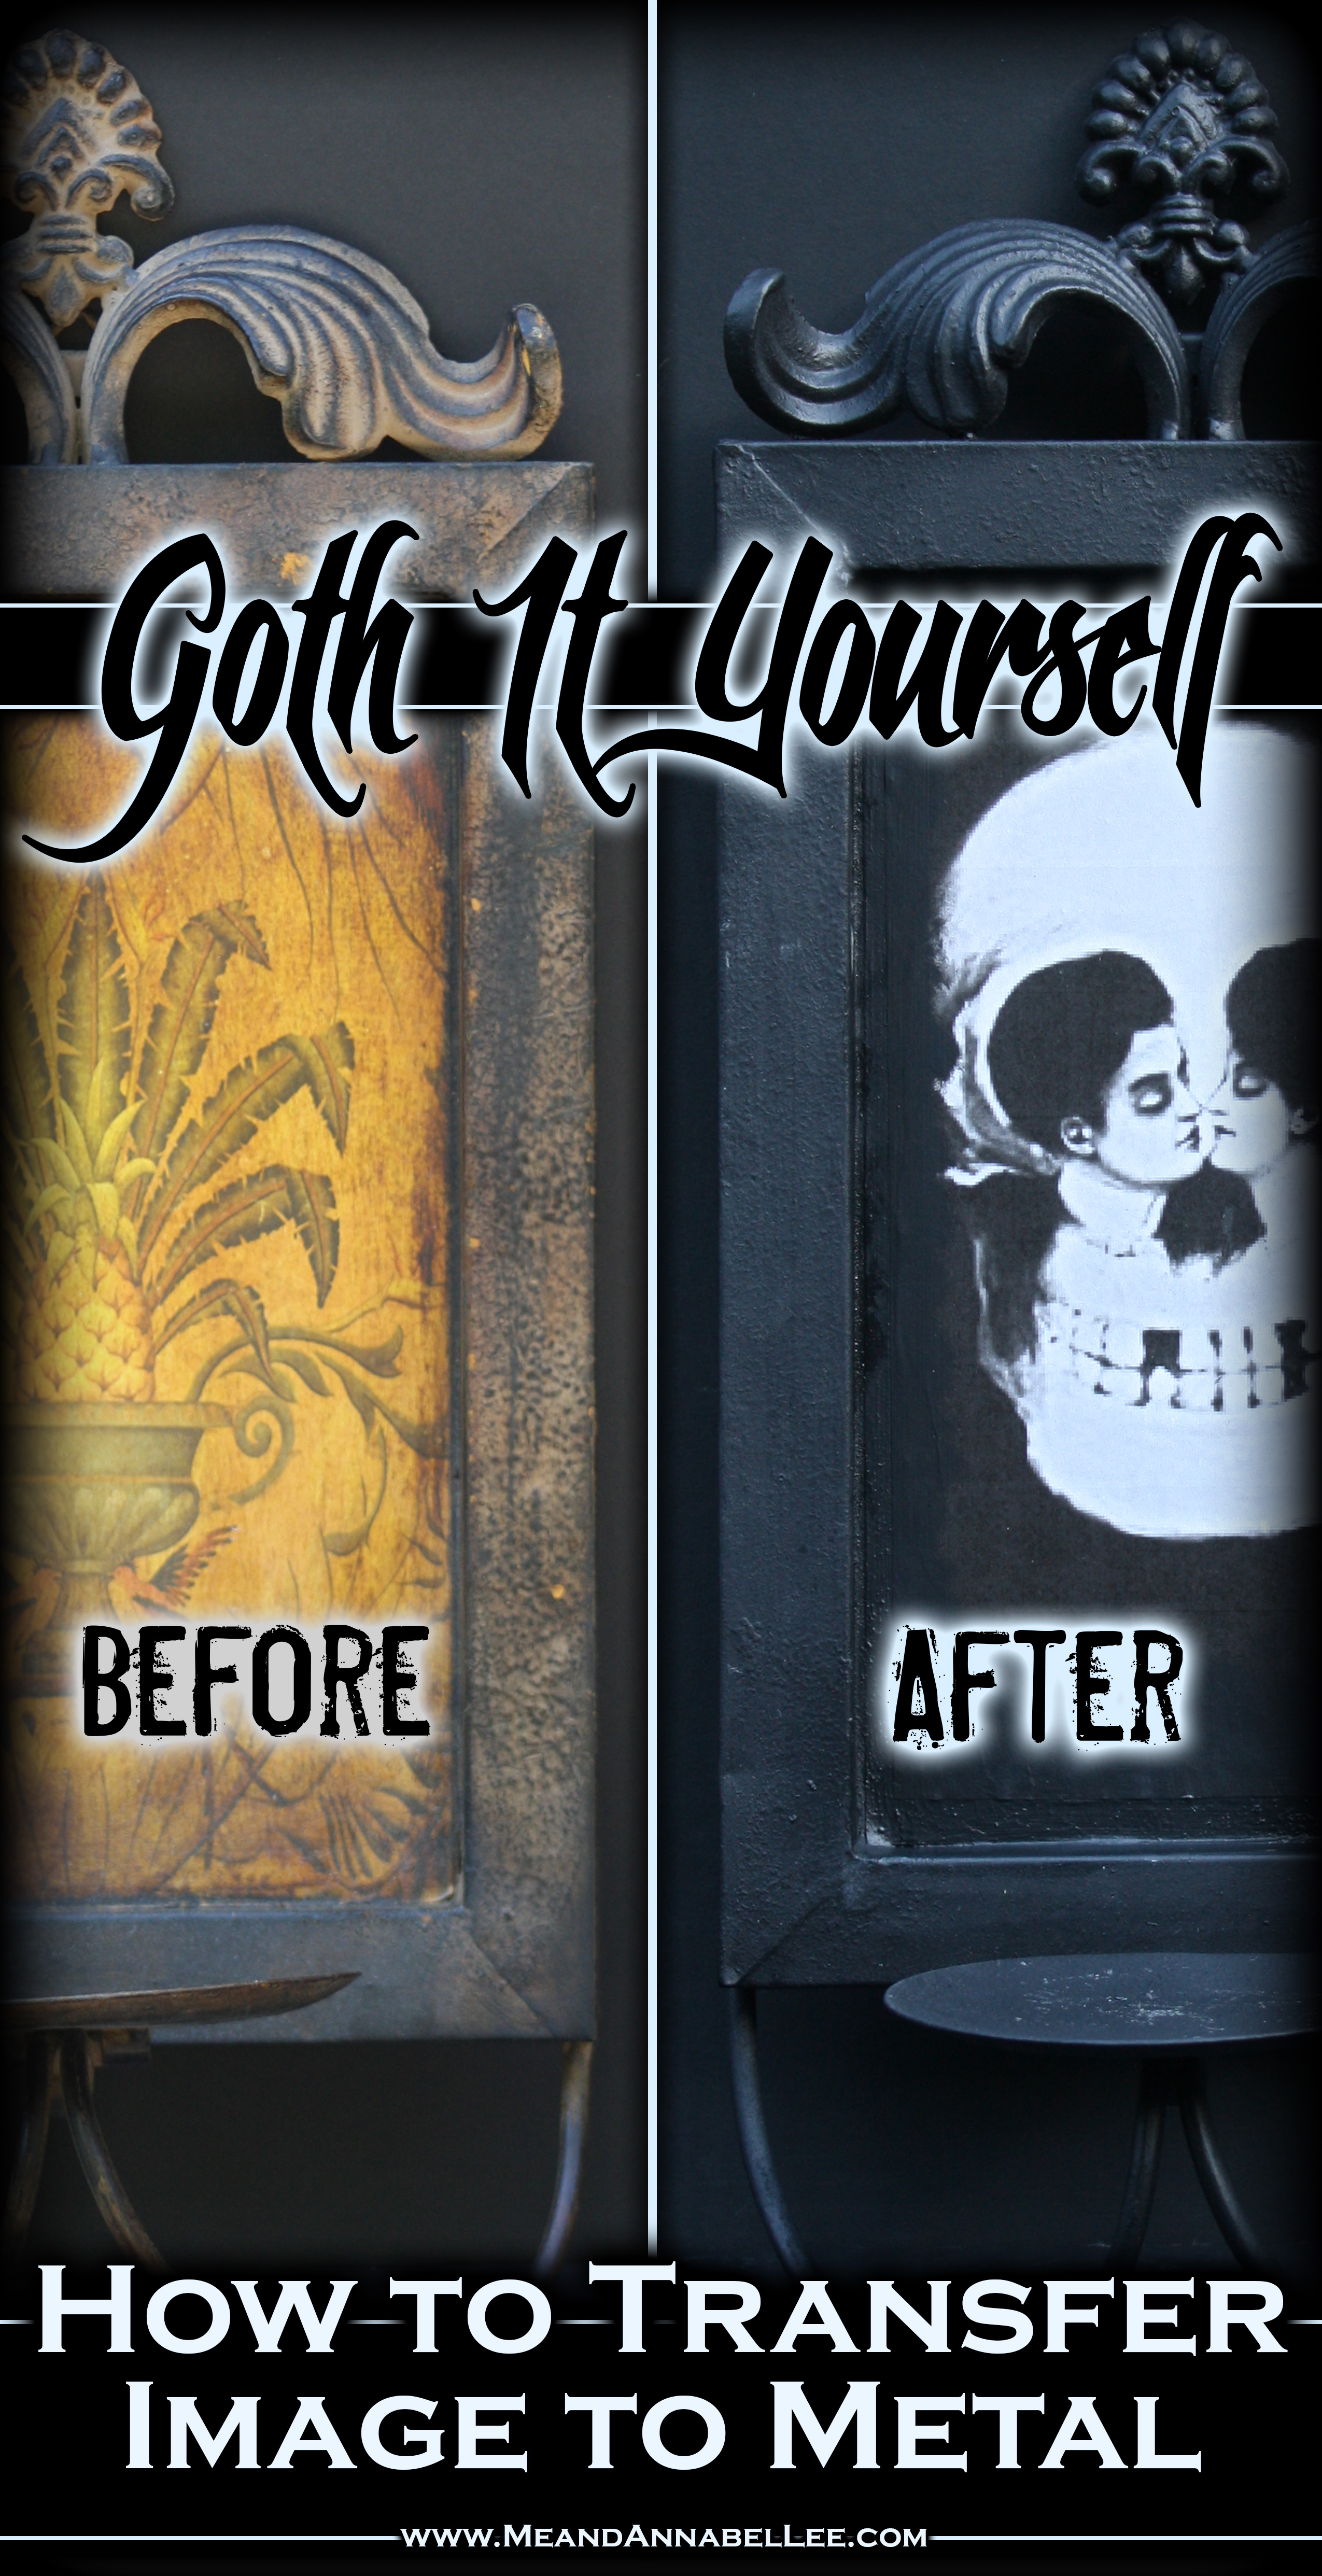 DIY Metamorphic Skull Wall Art / Candle Sconce - How to Transfer an Image to Metal using Mod Podge - Gothic Home Decor - Goth It Yourself - www.MeandAnnabelLee.com - Blog for all things Dark, Gothic, Victorian, & Unusual